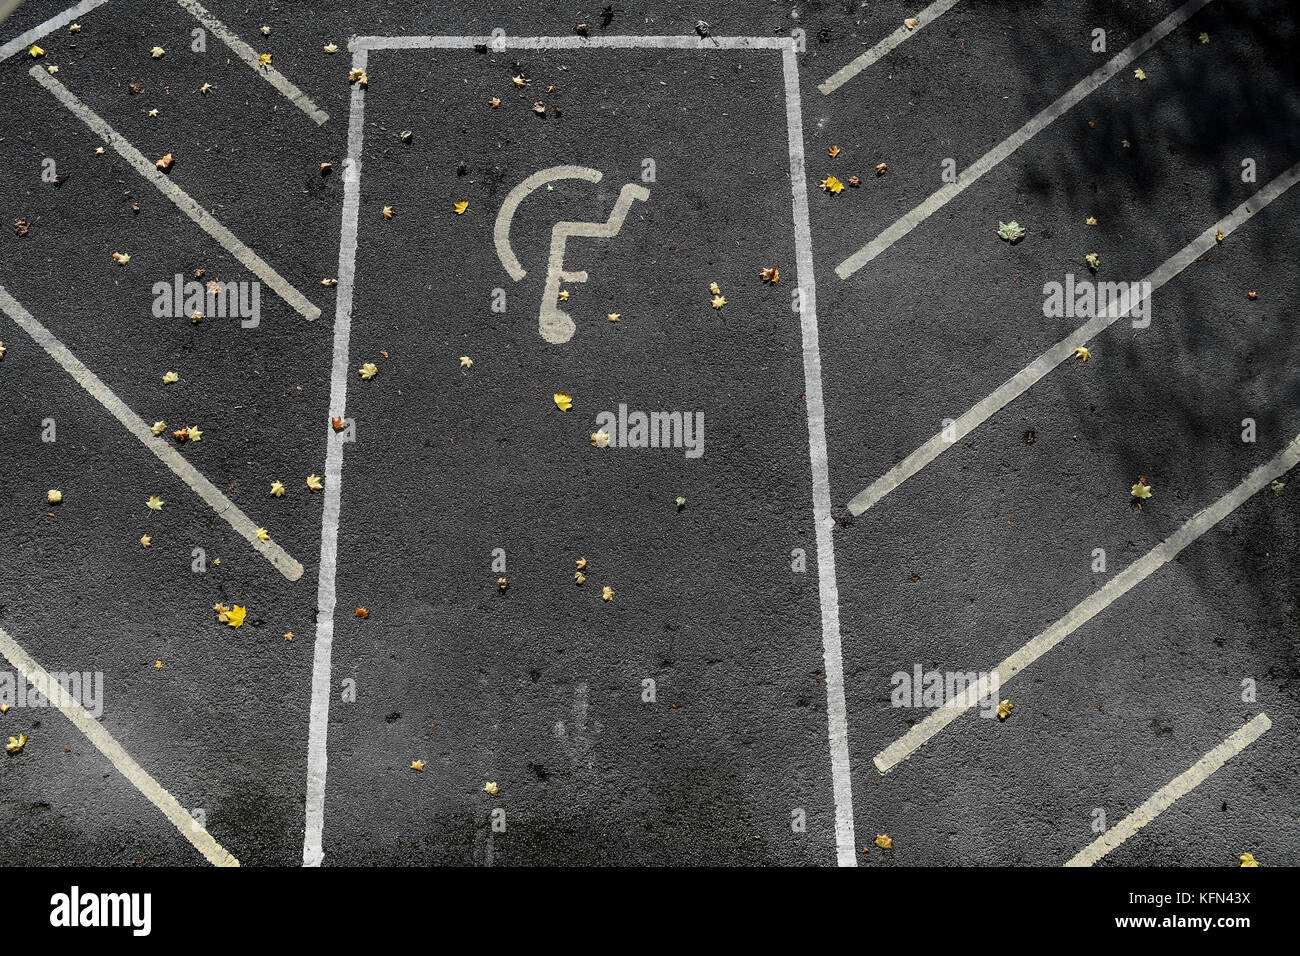 Empty disabled parking spaces with wheelchair markings on photographed from above. Stock Photo